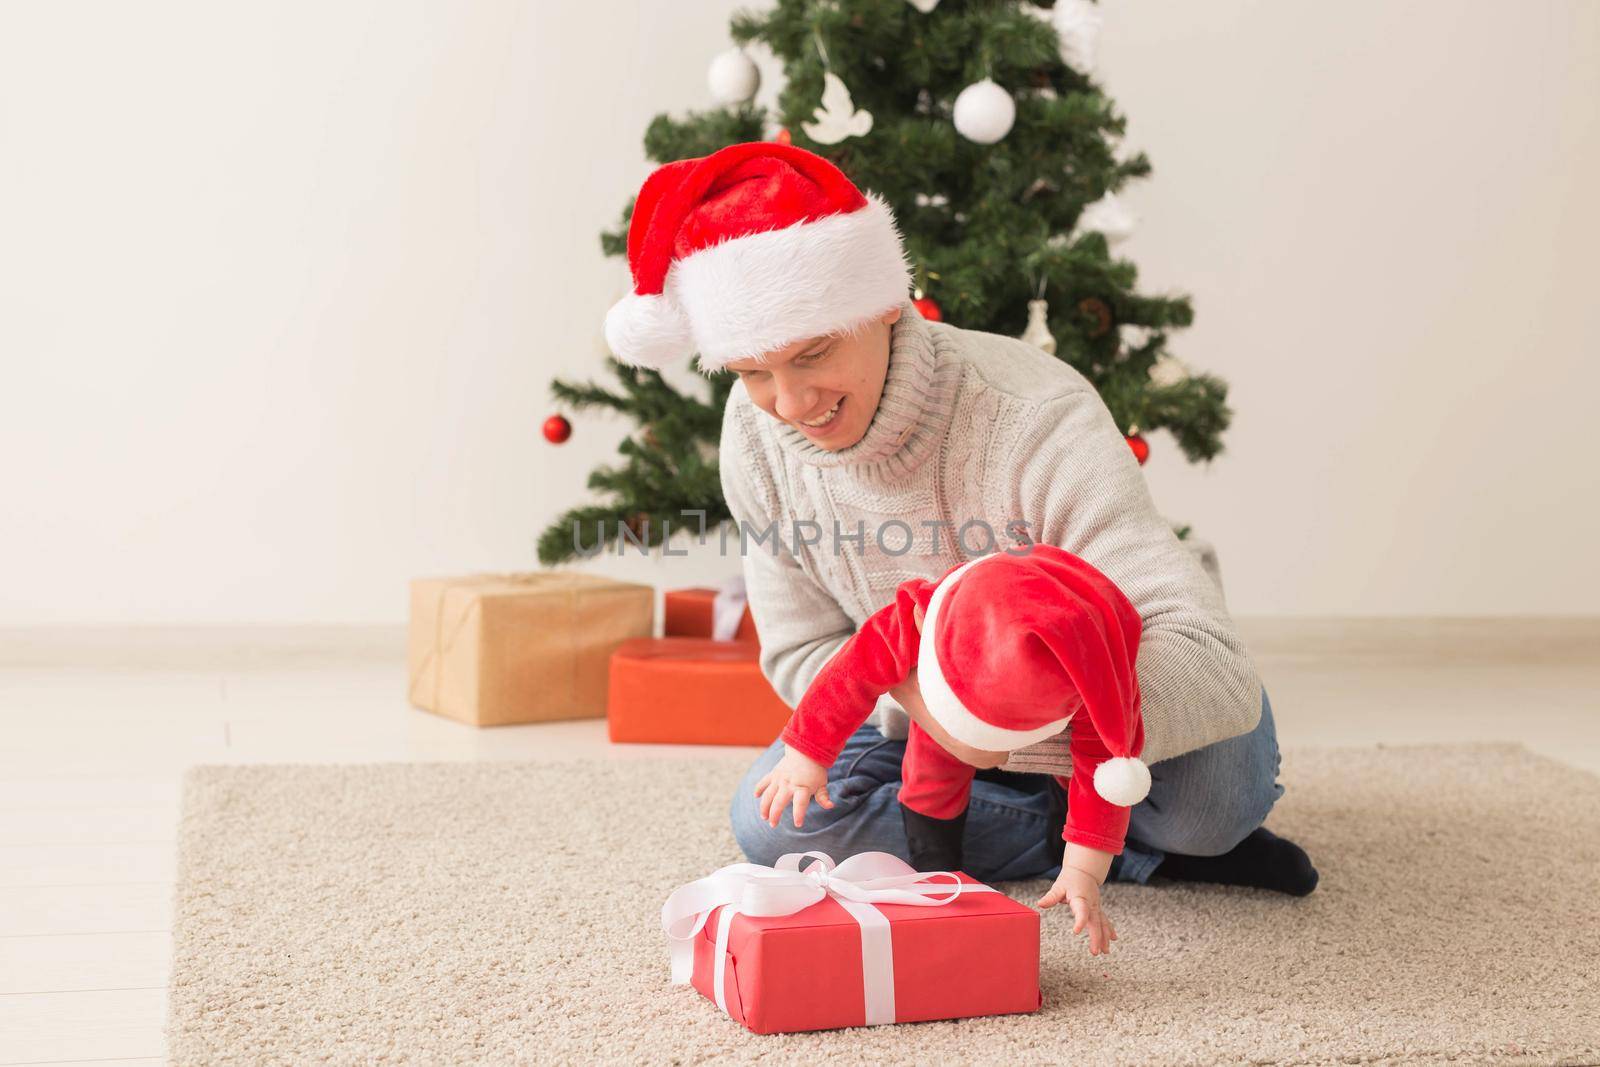 Father with his baby boy wearing Santa hats celebrating Christmas